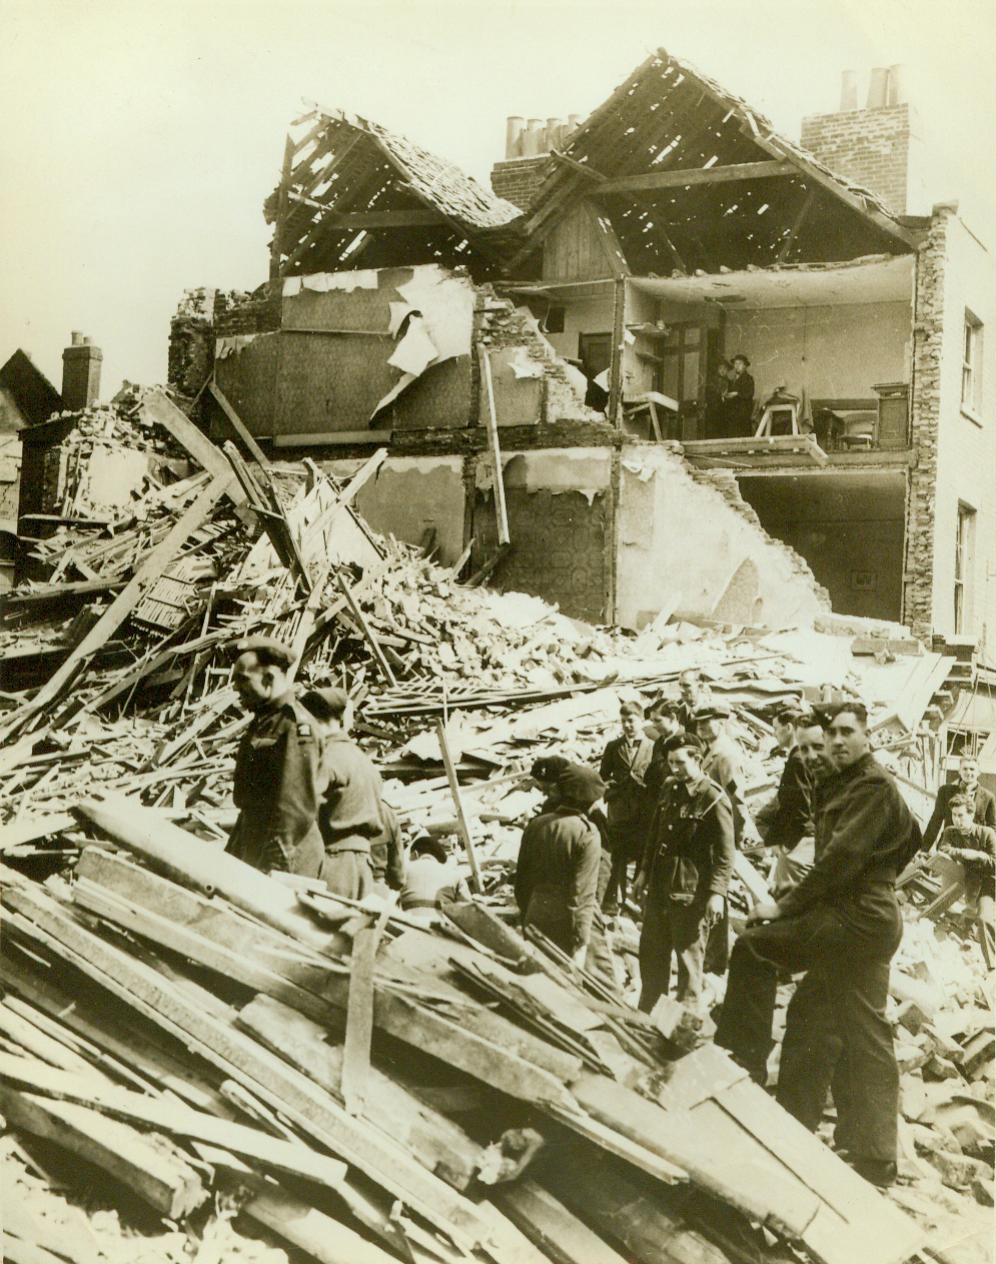 The new order visits Canterbury, 6/9/1942. CANTERBURY, ENGLAND - A pile of rubble is all that remains of these shops and dwellings in old Canterbury, bombed by the Nazis as a reprisal for the R.A.F.'s great attack on Cologne.; Credit line (ACME);